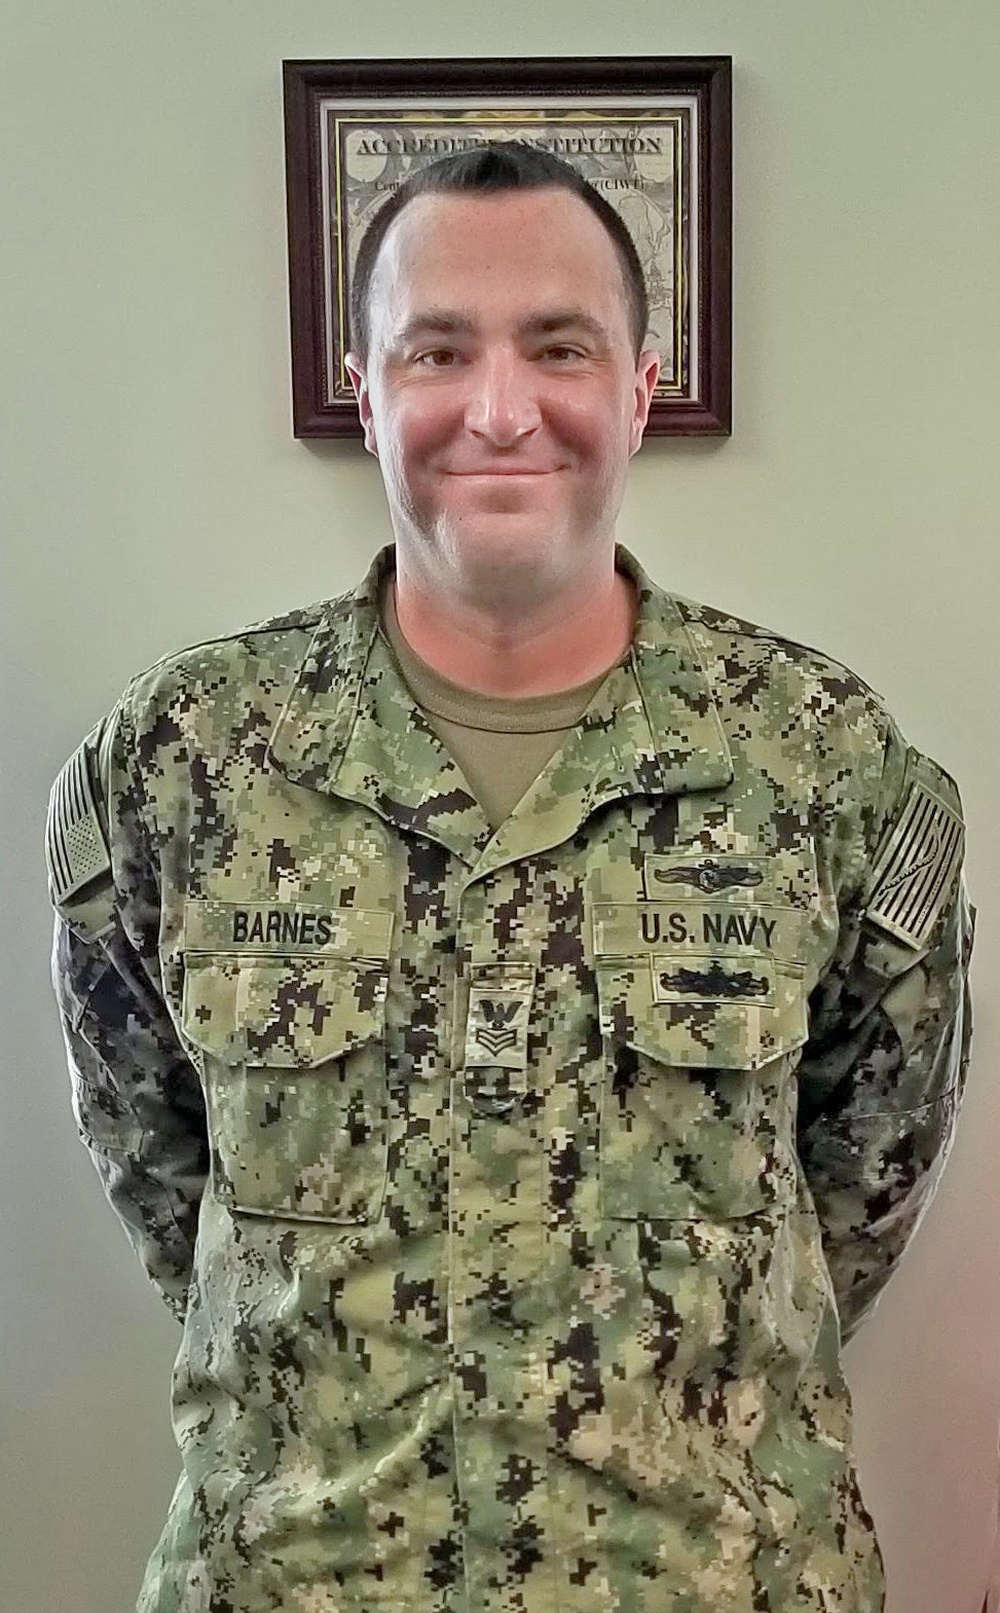 DVIDS - News - CIWT Det. Fort Gordon Selects 2020 Sailor of the Year